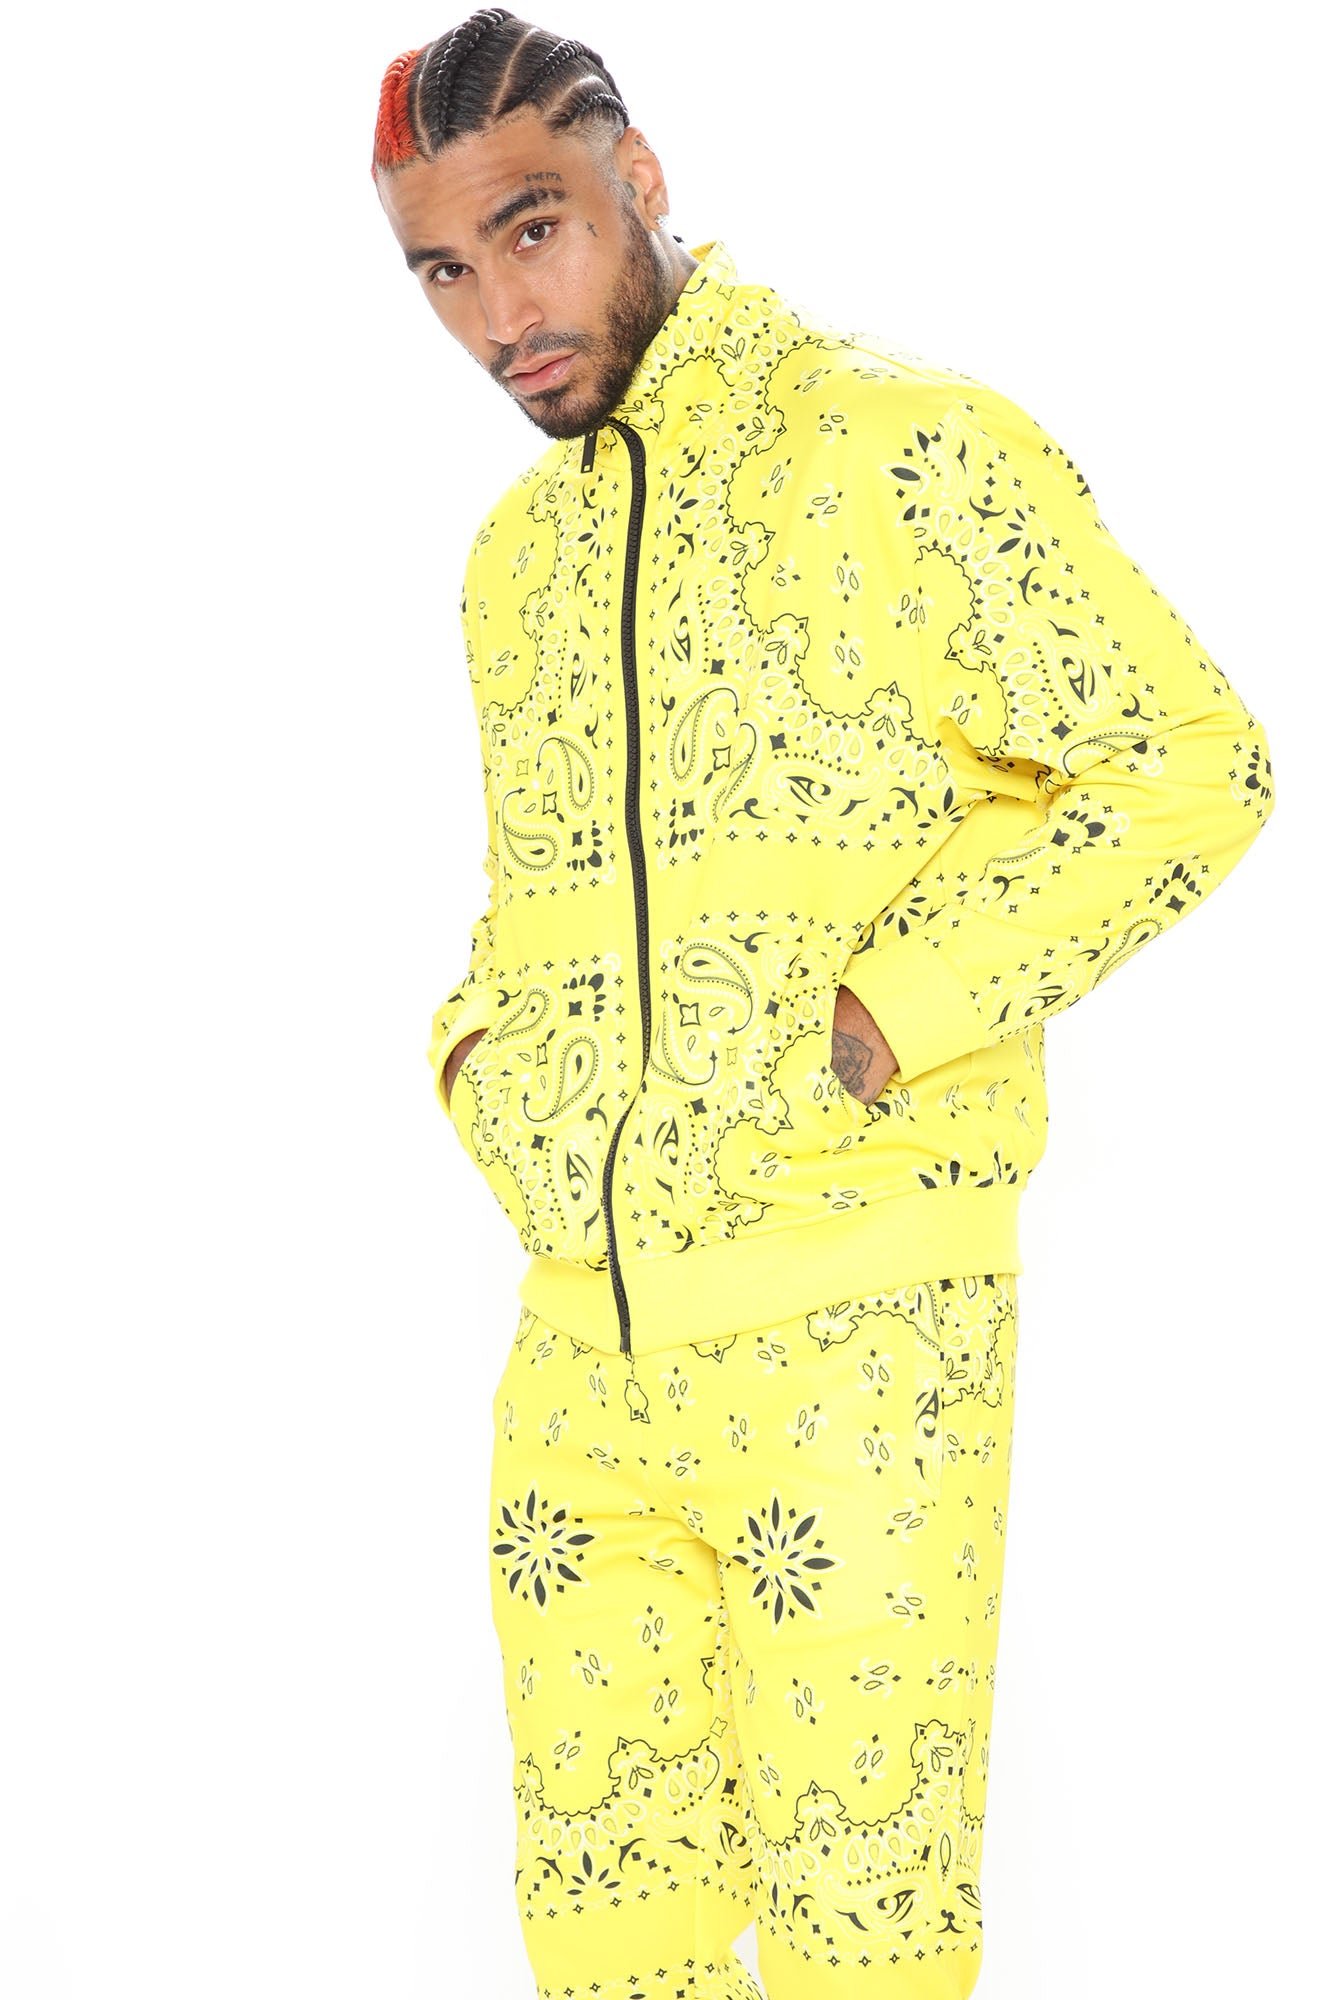 Just Forget It Track Jacket - Yellow/combo - L